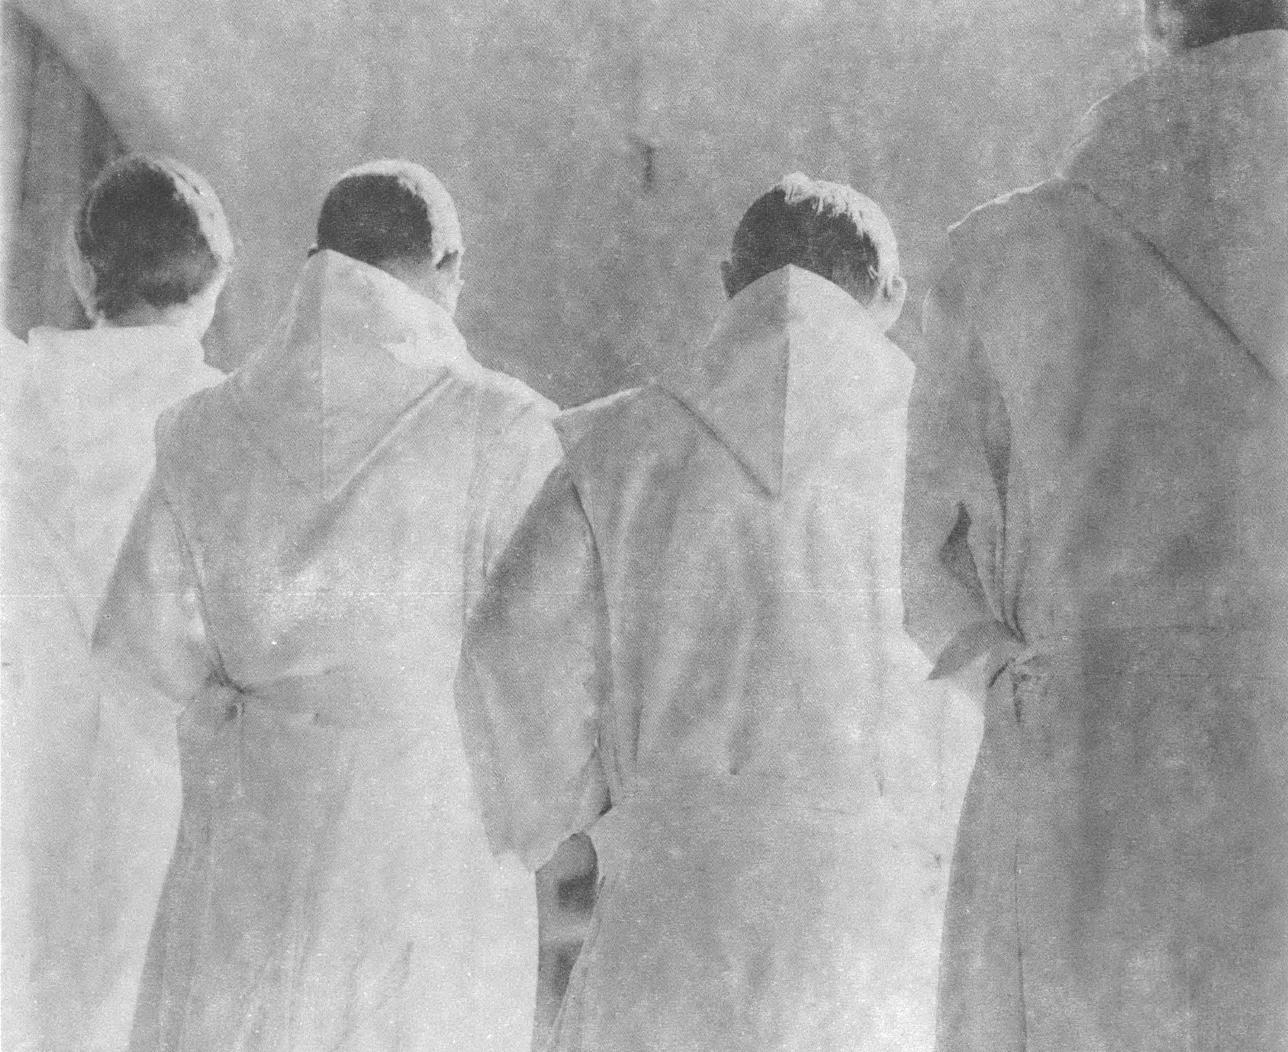 Black and white photo of three priests in white robes with back turned to camera